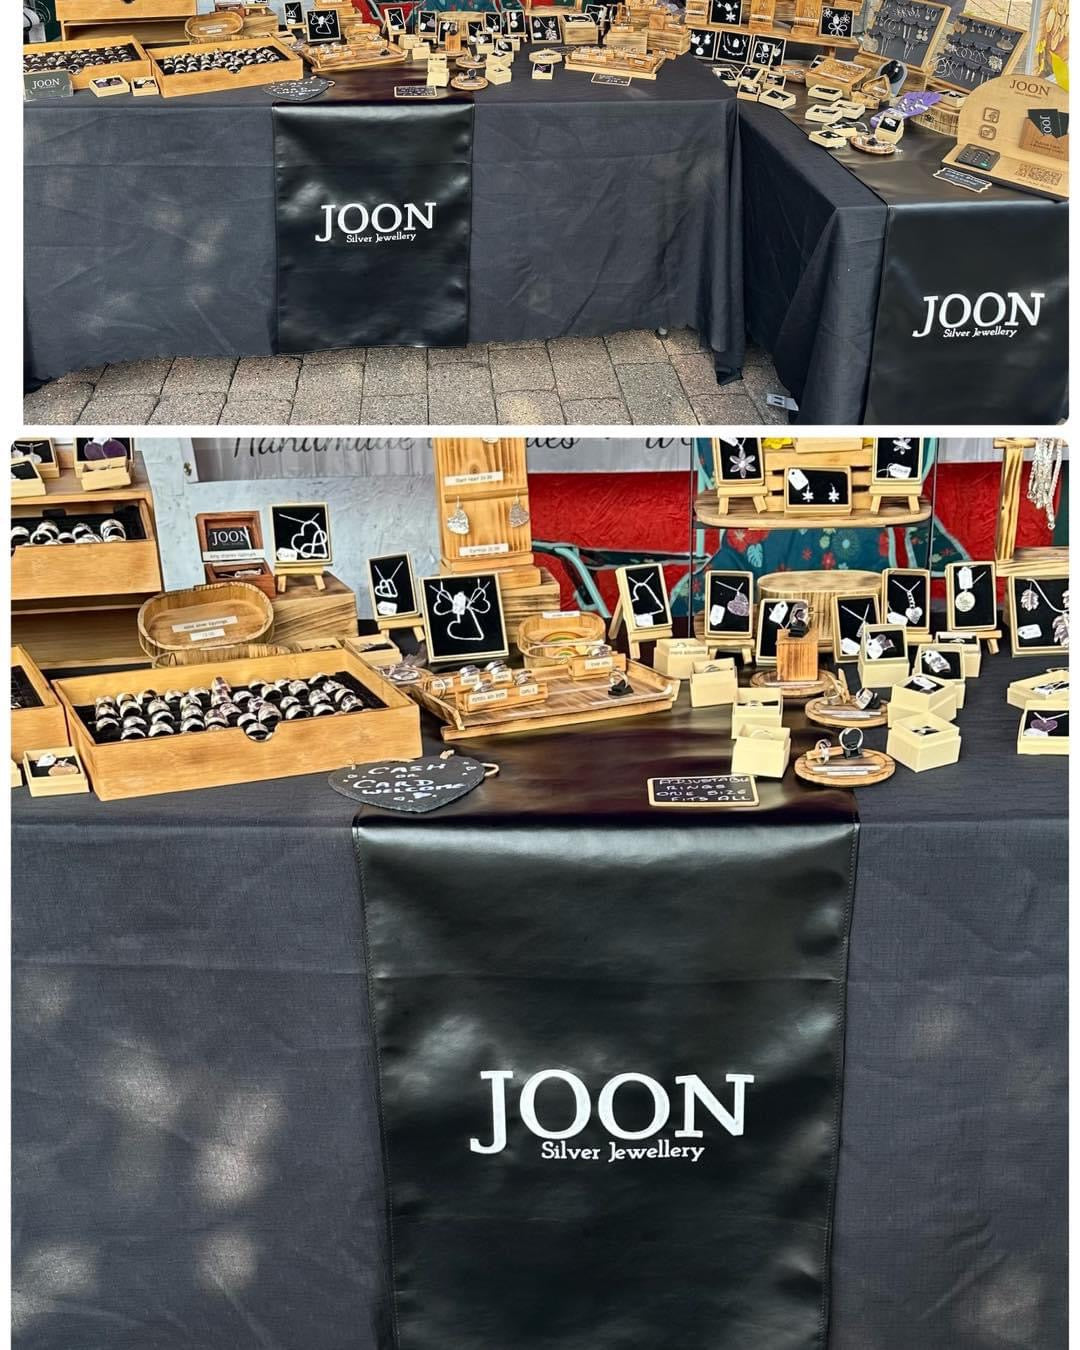 JOON Silver Jewellery Faux Leather Custom Business Logo Table Runner - by Emma Easter Handcrafted